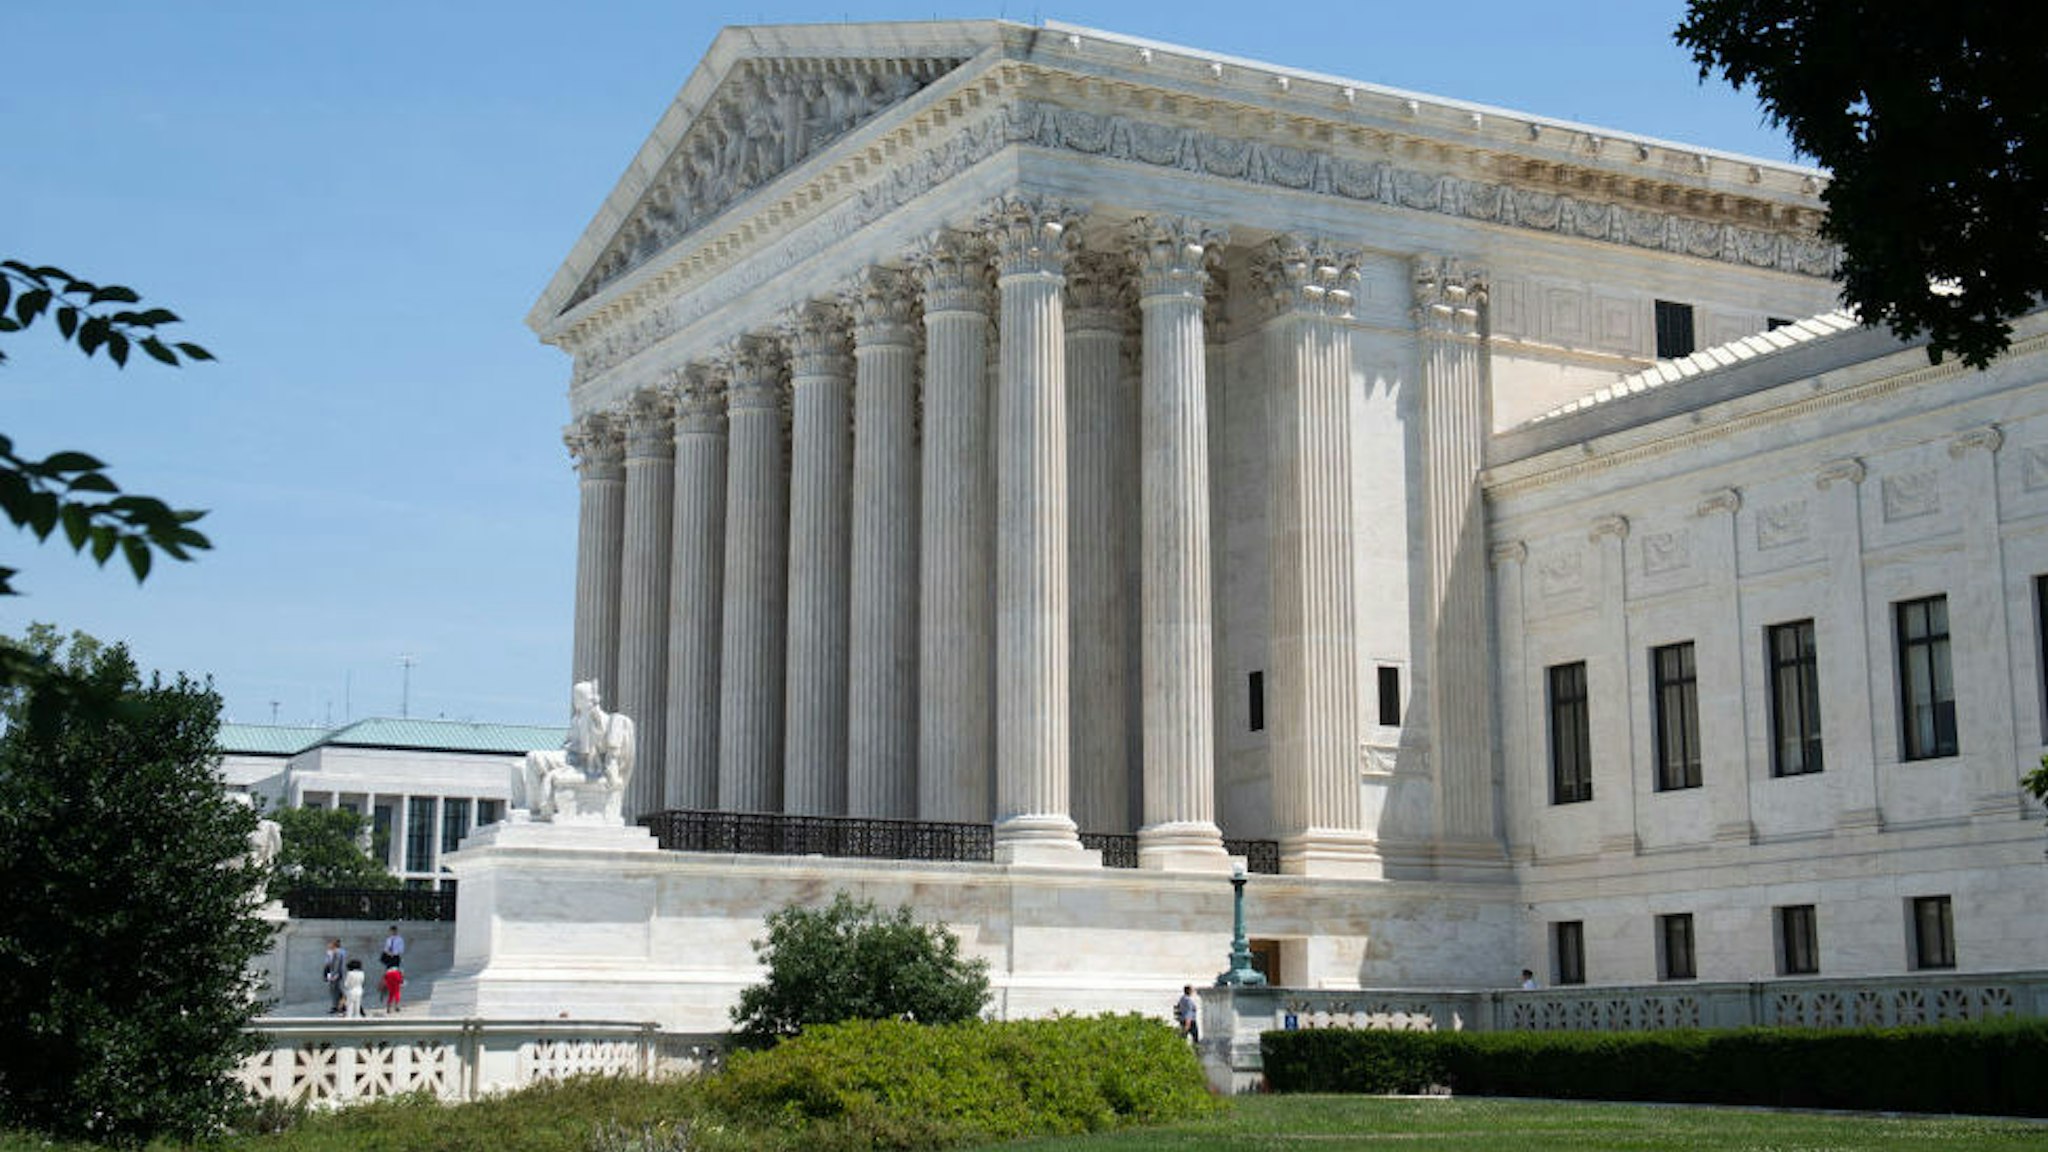 The US Supreme Court is seen in Washington, DC, June 24, 2019.